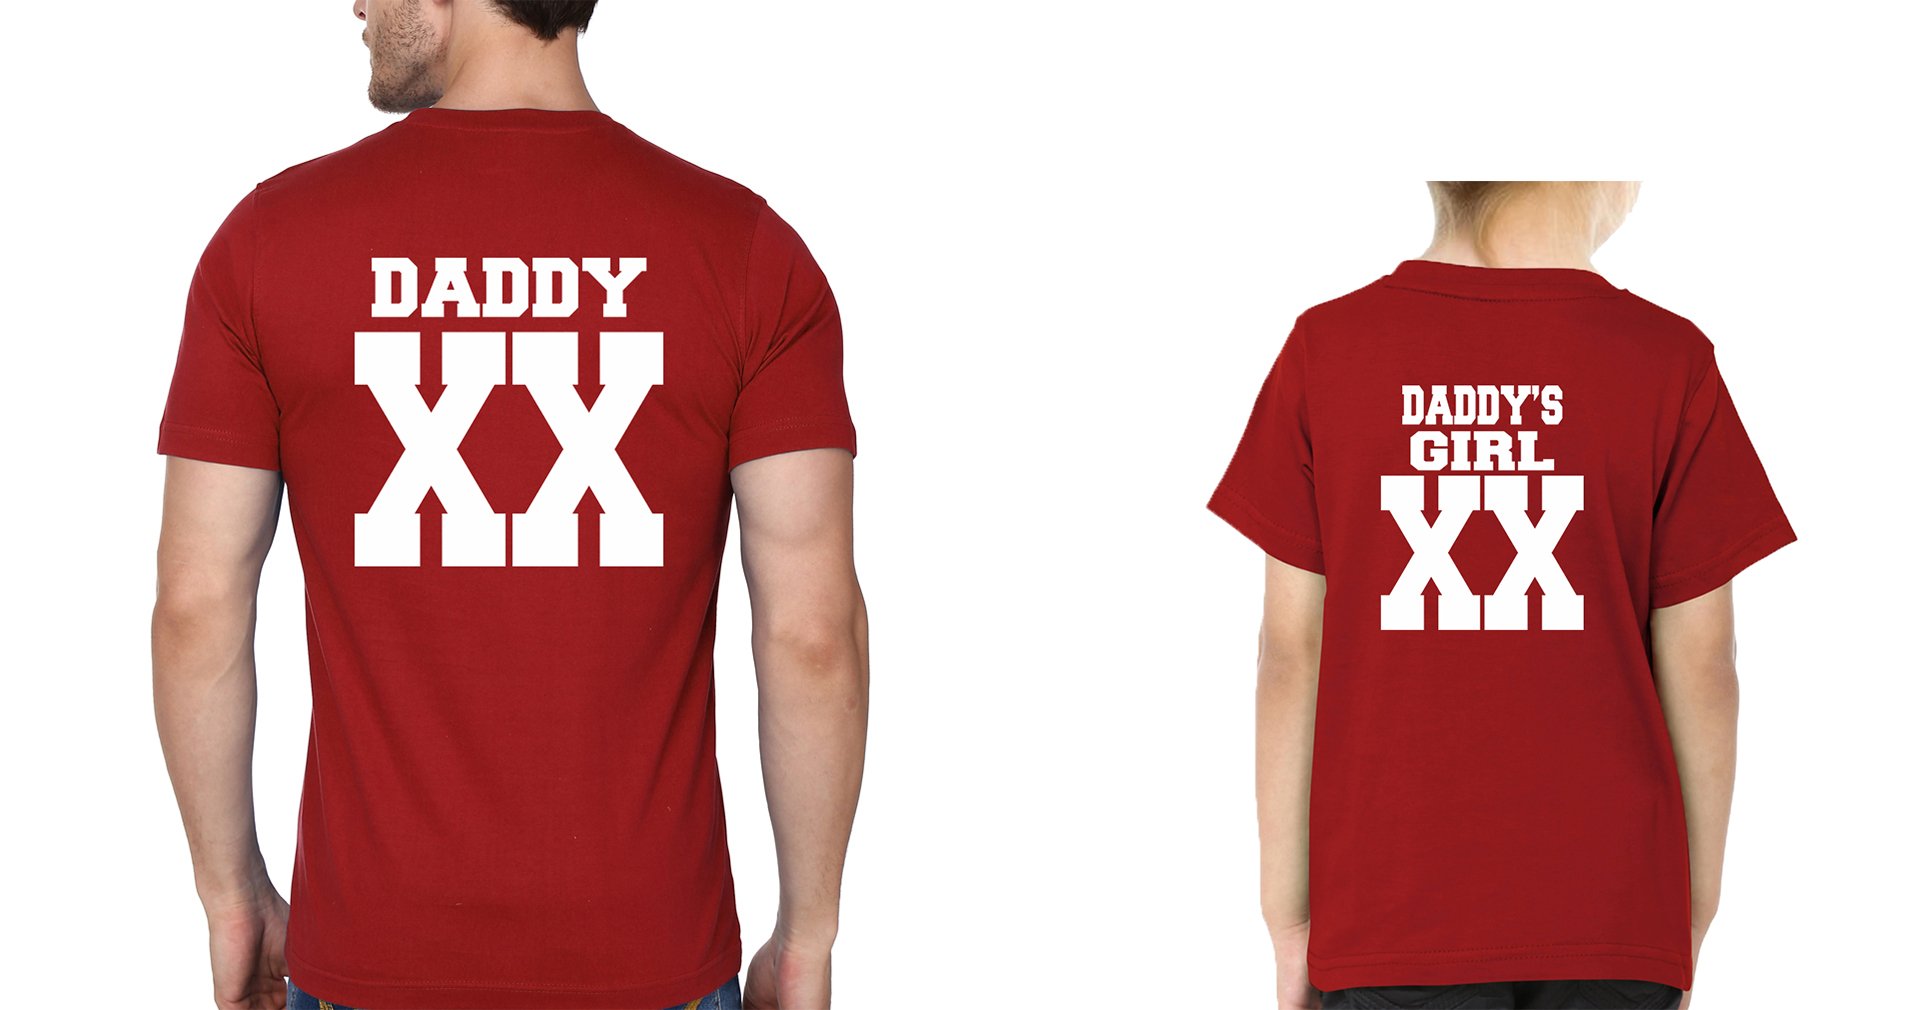 Daddy XX Daddy's Girl XX Father and Daughter Matching T-Shirt- FunkyTradition